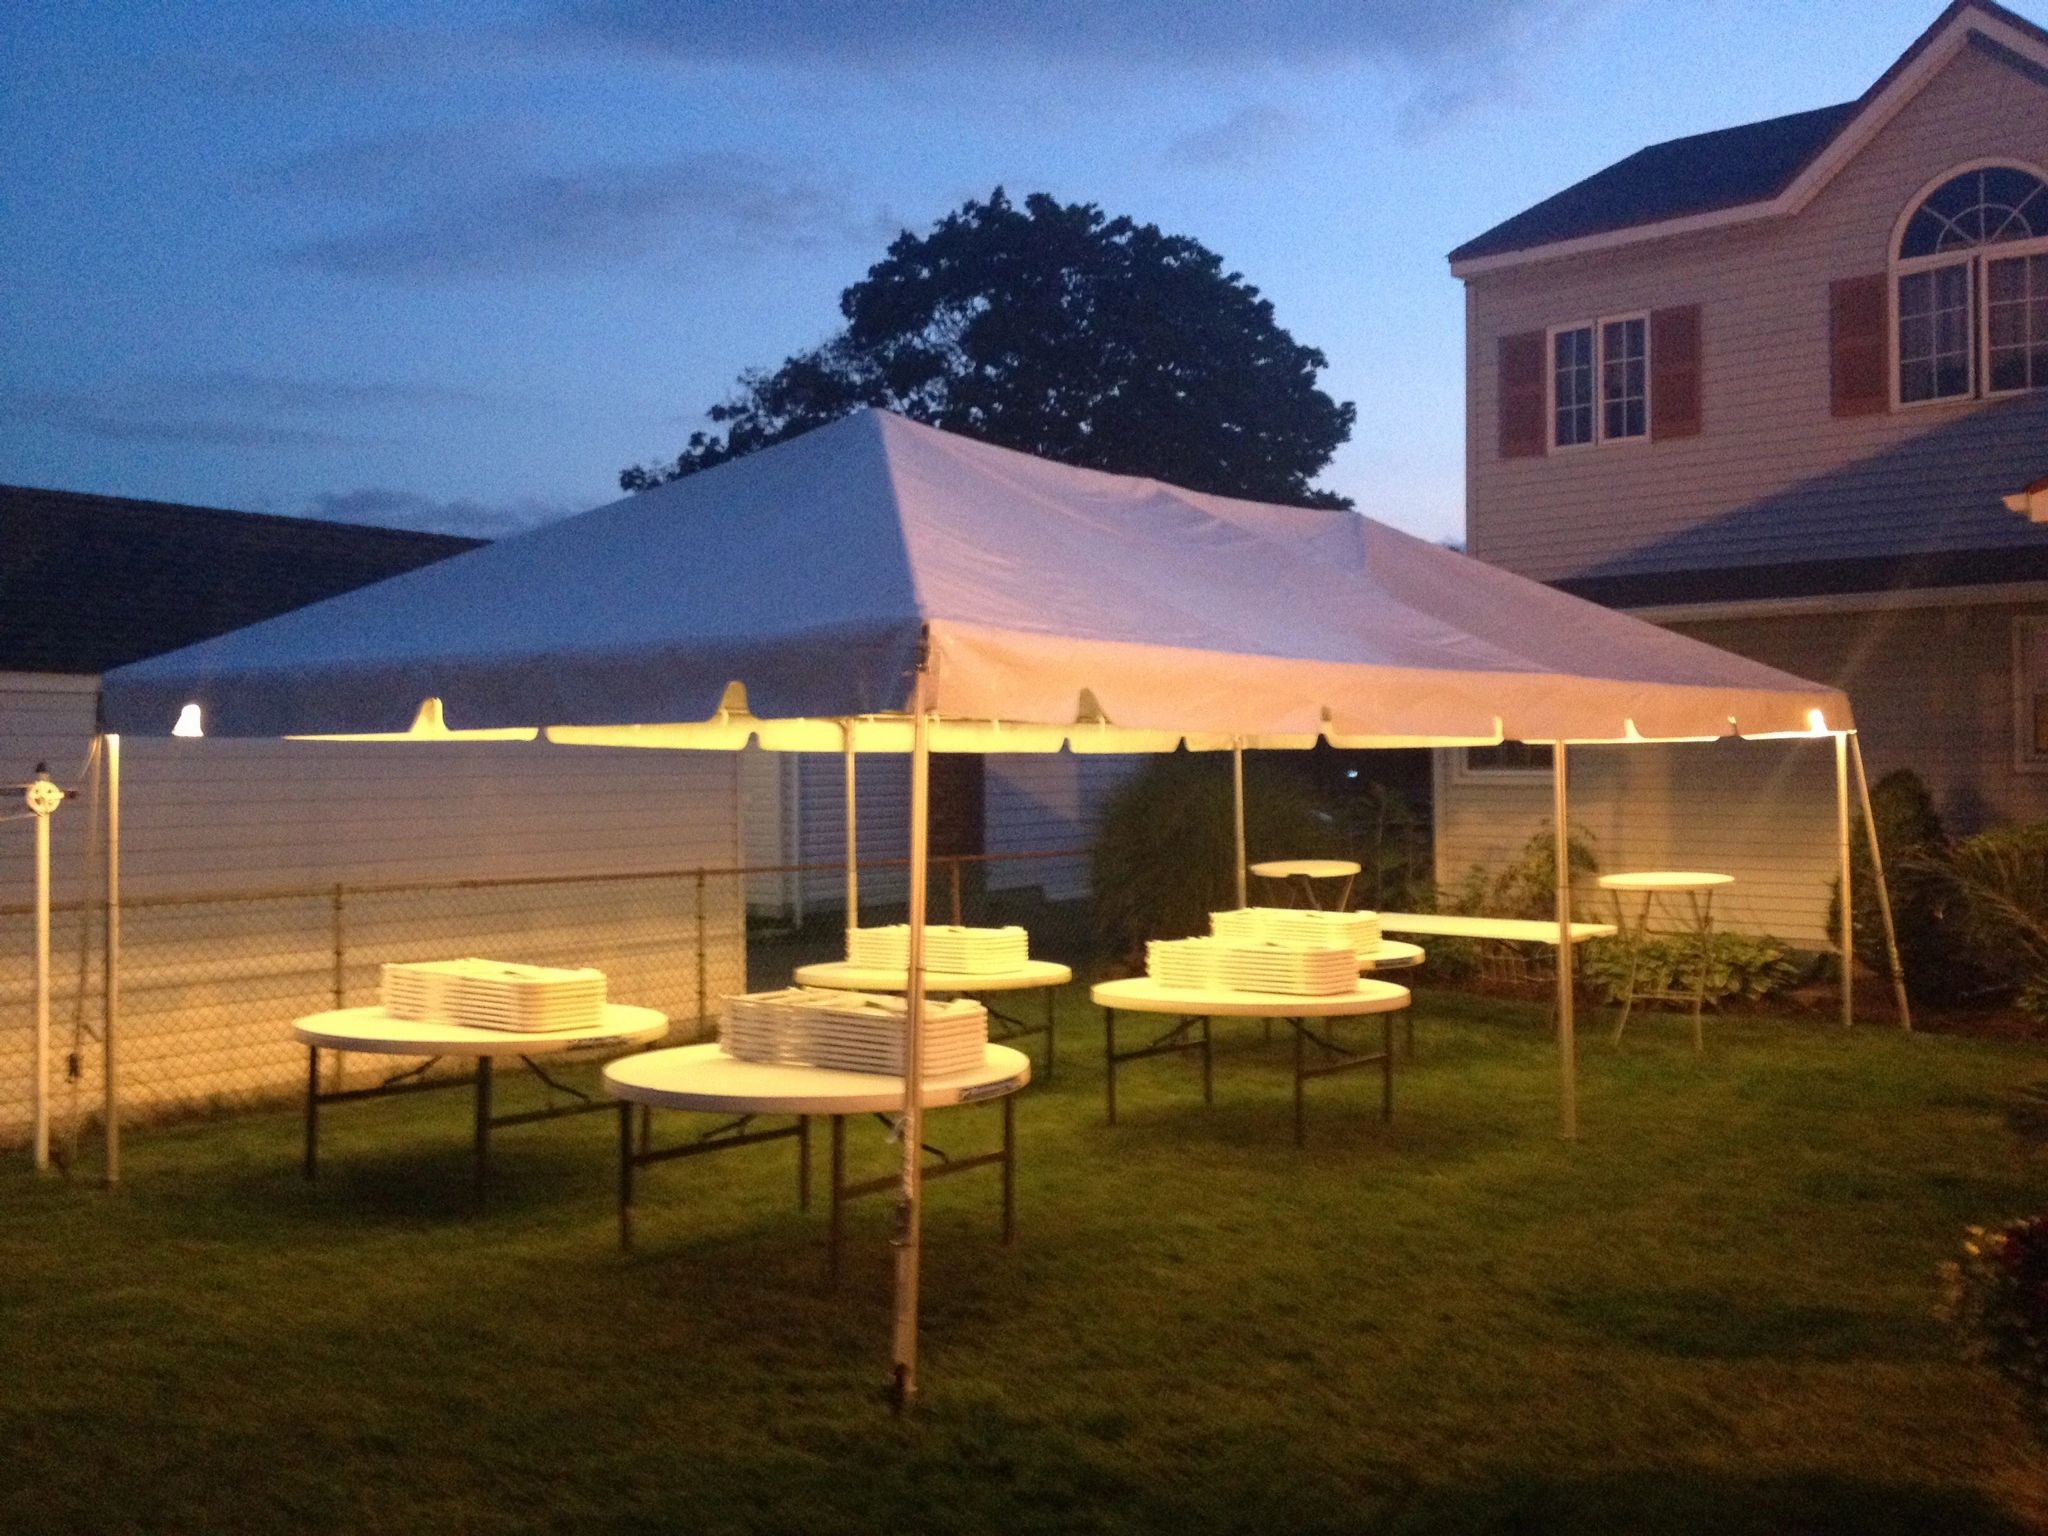 30x40 Frame Tent - Hire in New York, New Jersey